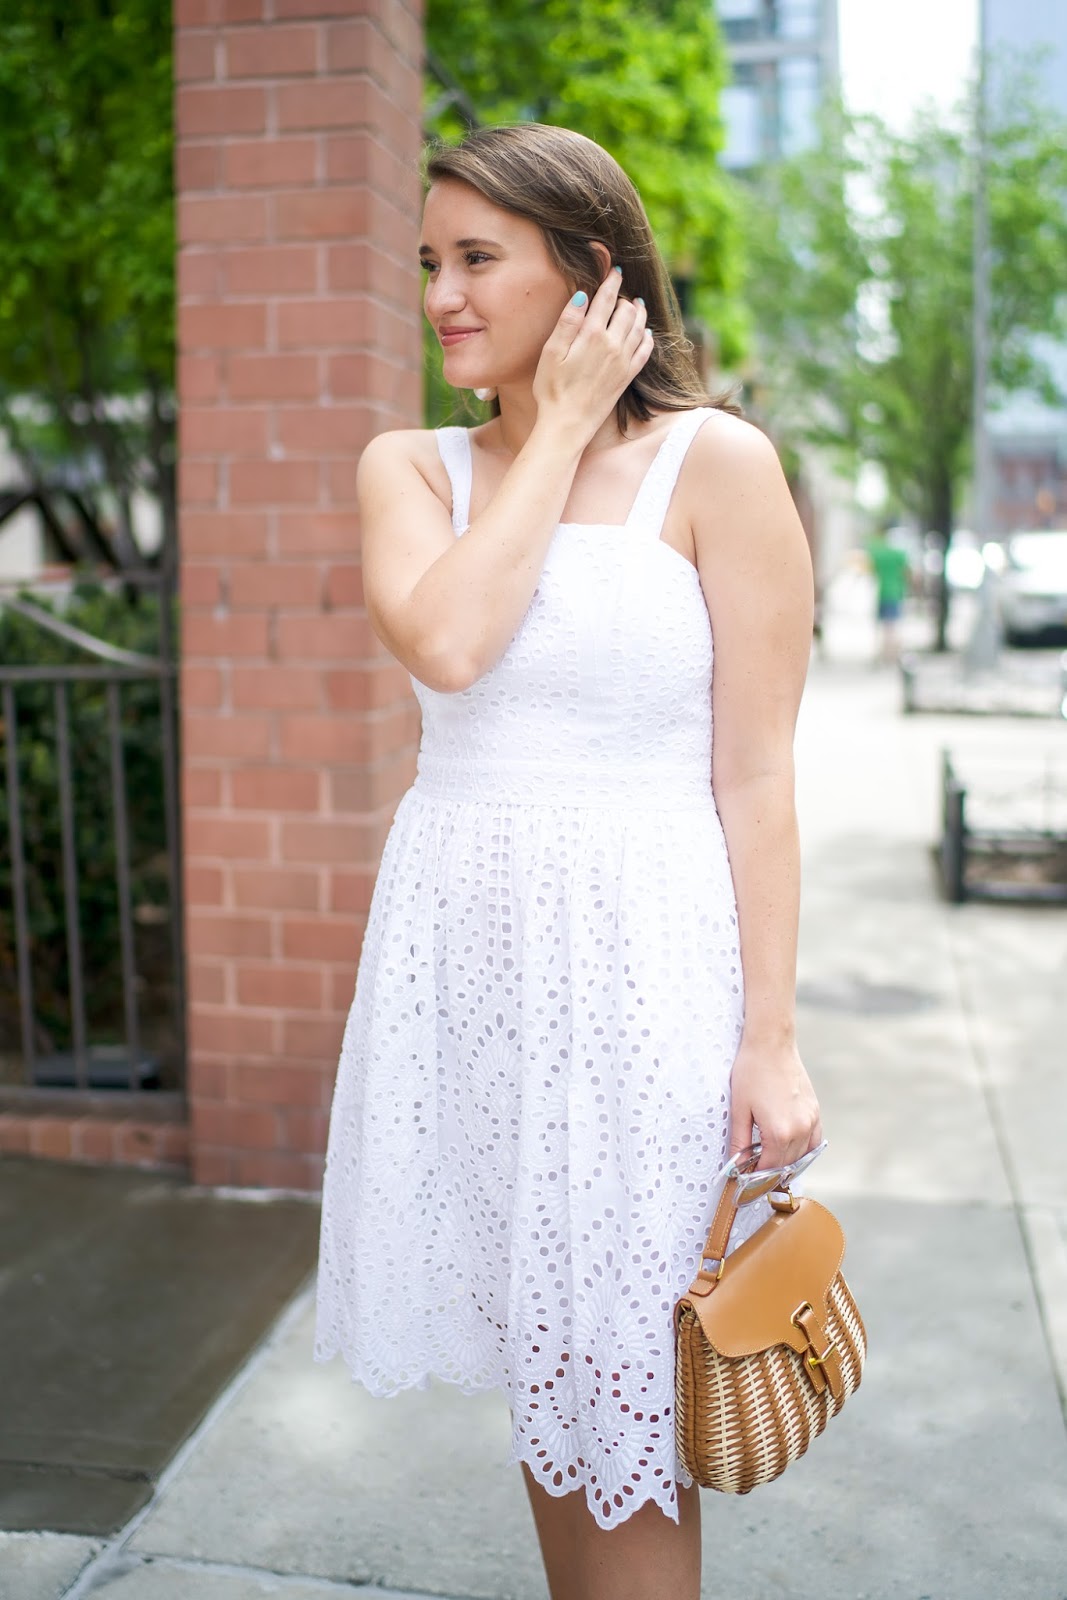 Eyelet Dress for Spring | Connecticut Fashion and Lifestyle Blog ...